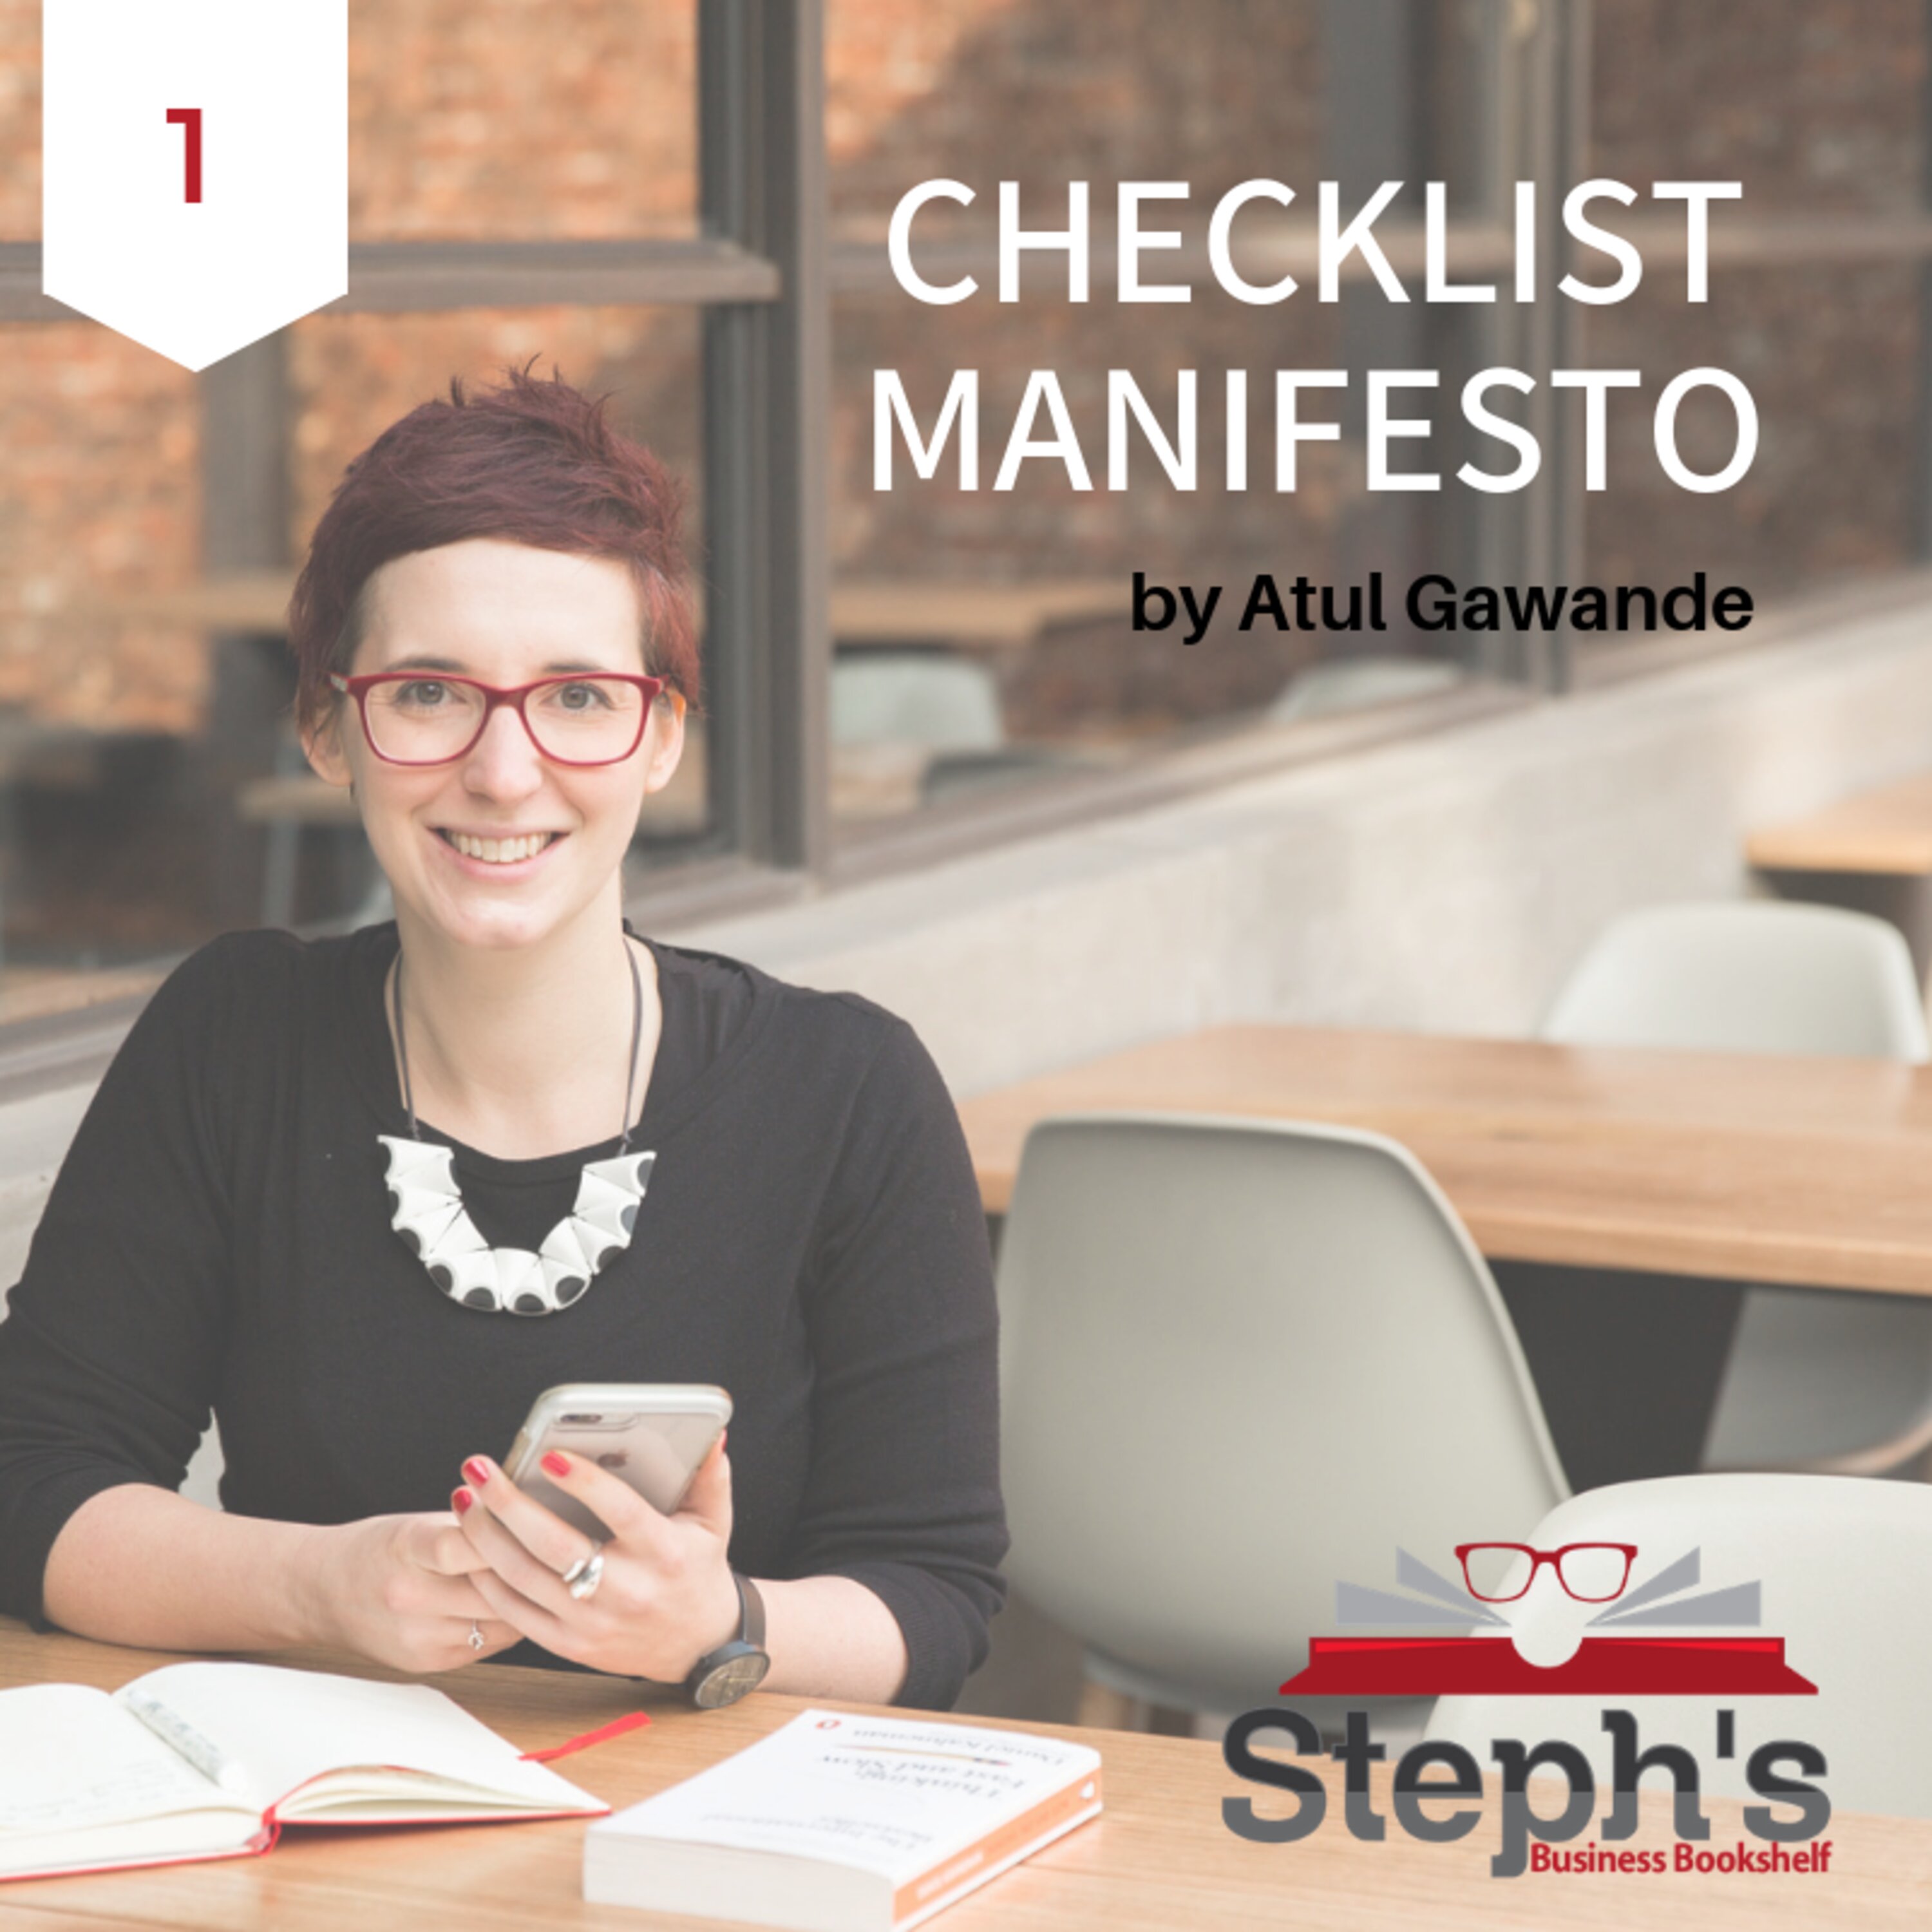 Checklist Manifesto by Atul Gawande: How to avoid death, bankruptcy and cooking the wrong meal Image